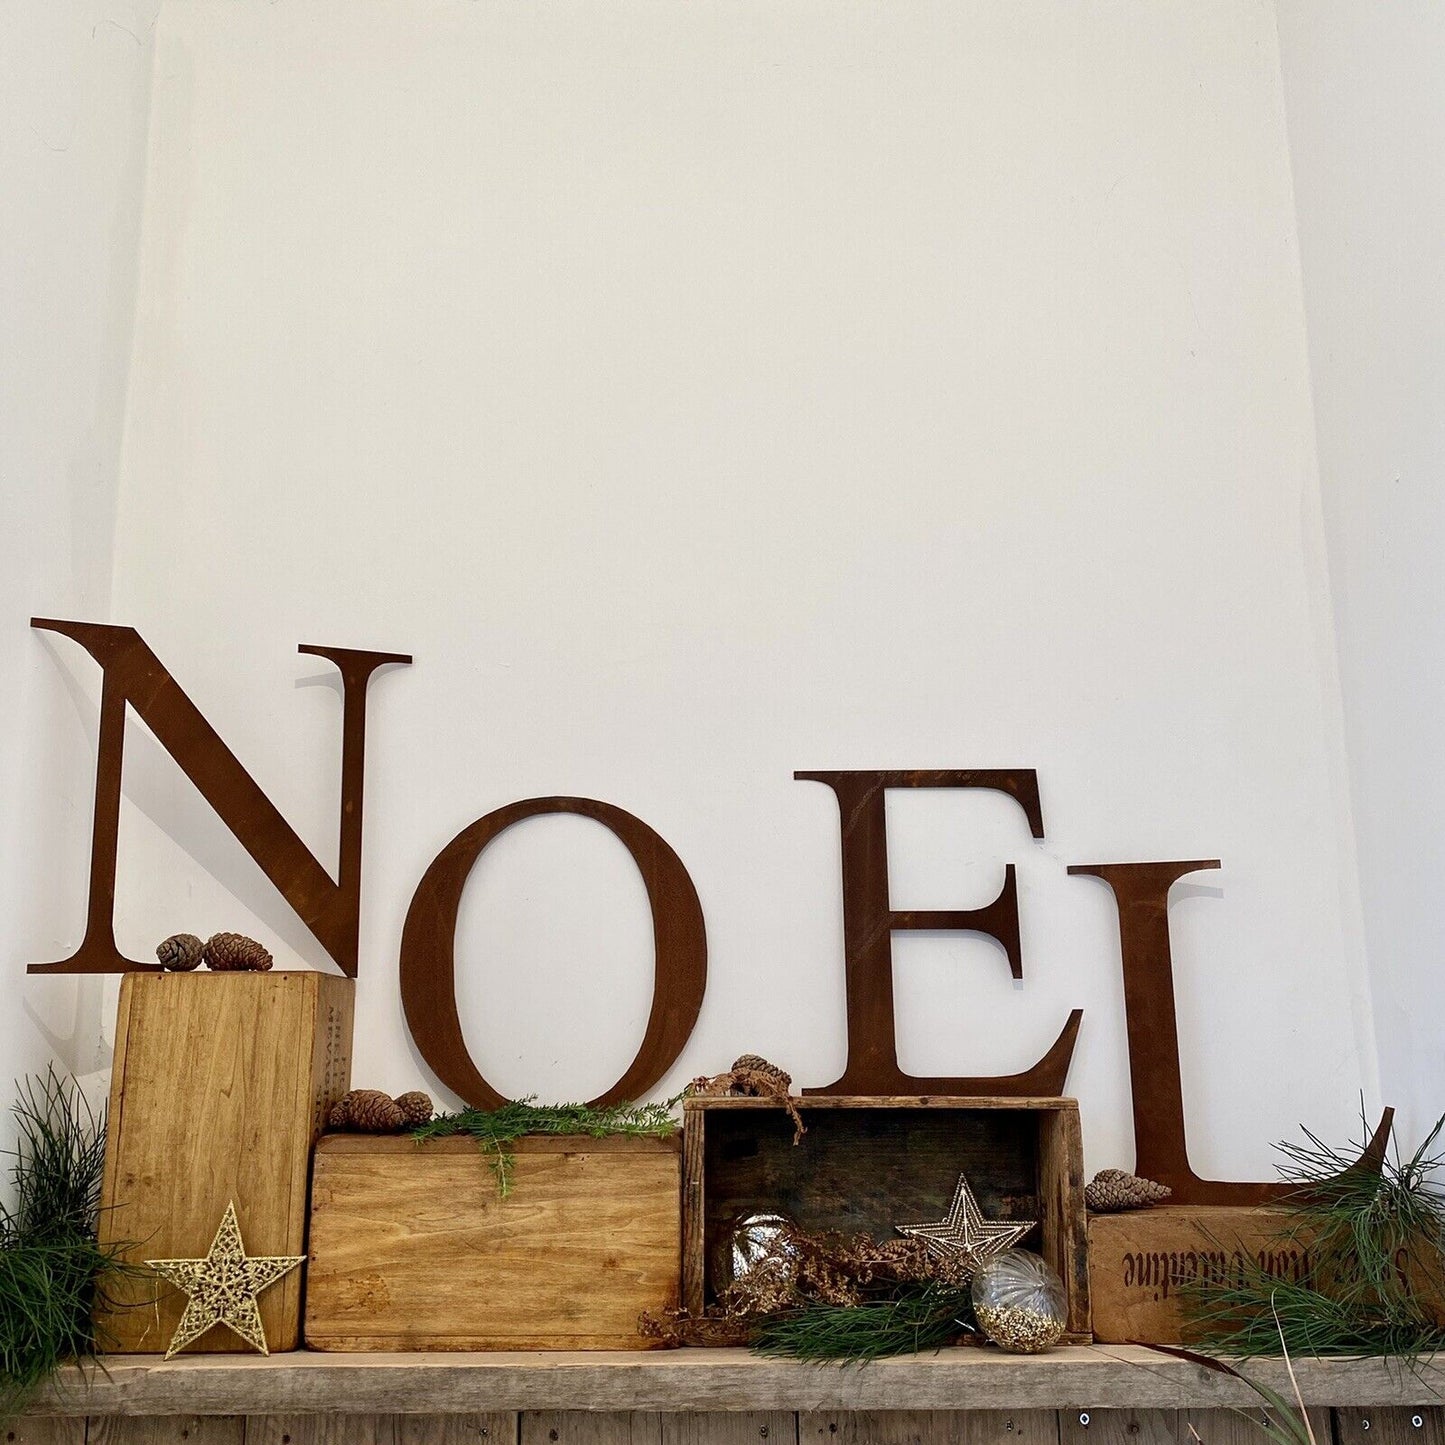 NOEL Rustic Rusted Metal Letters Christmas House Fireplace Mantle Decoration